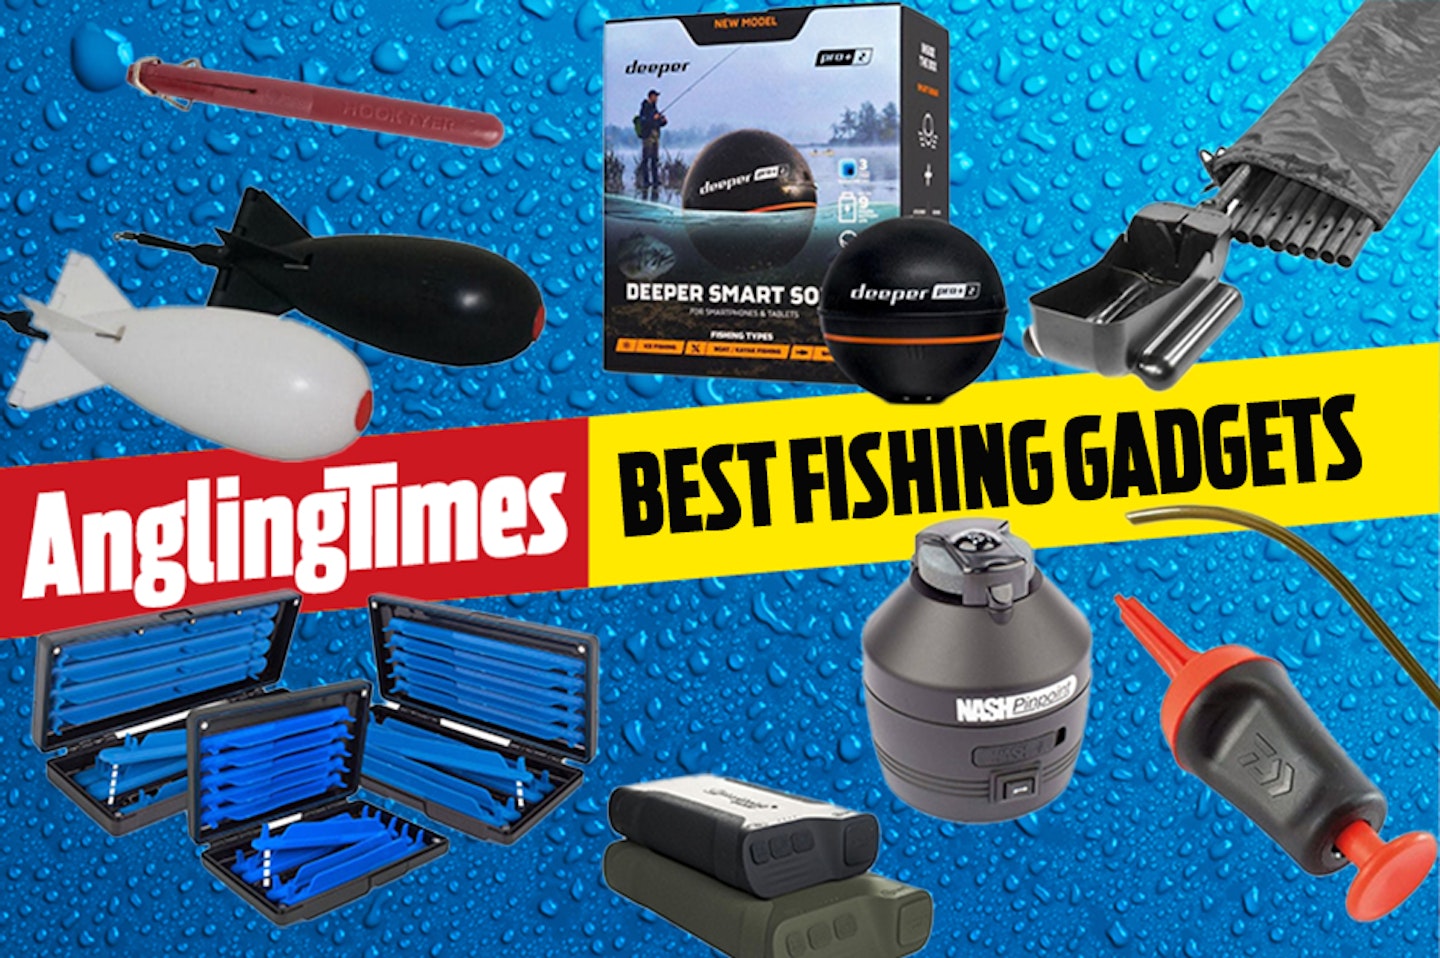 The best fishing gadgets